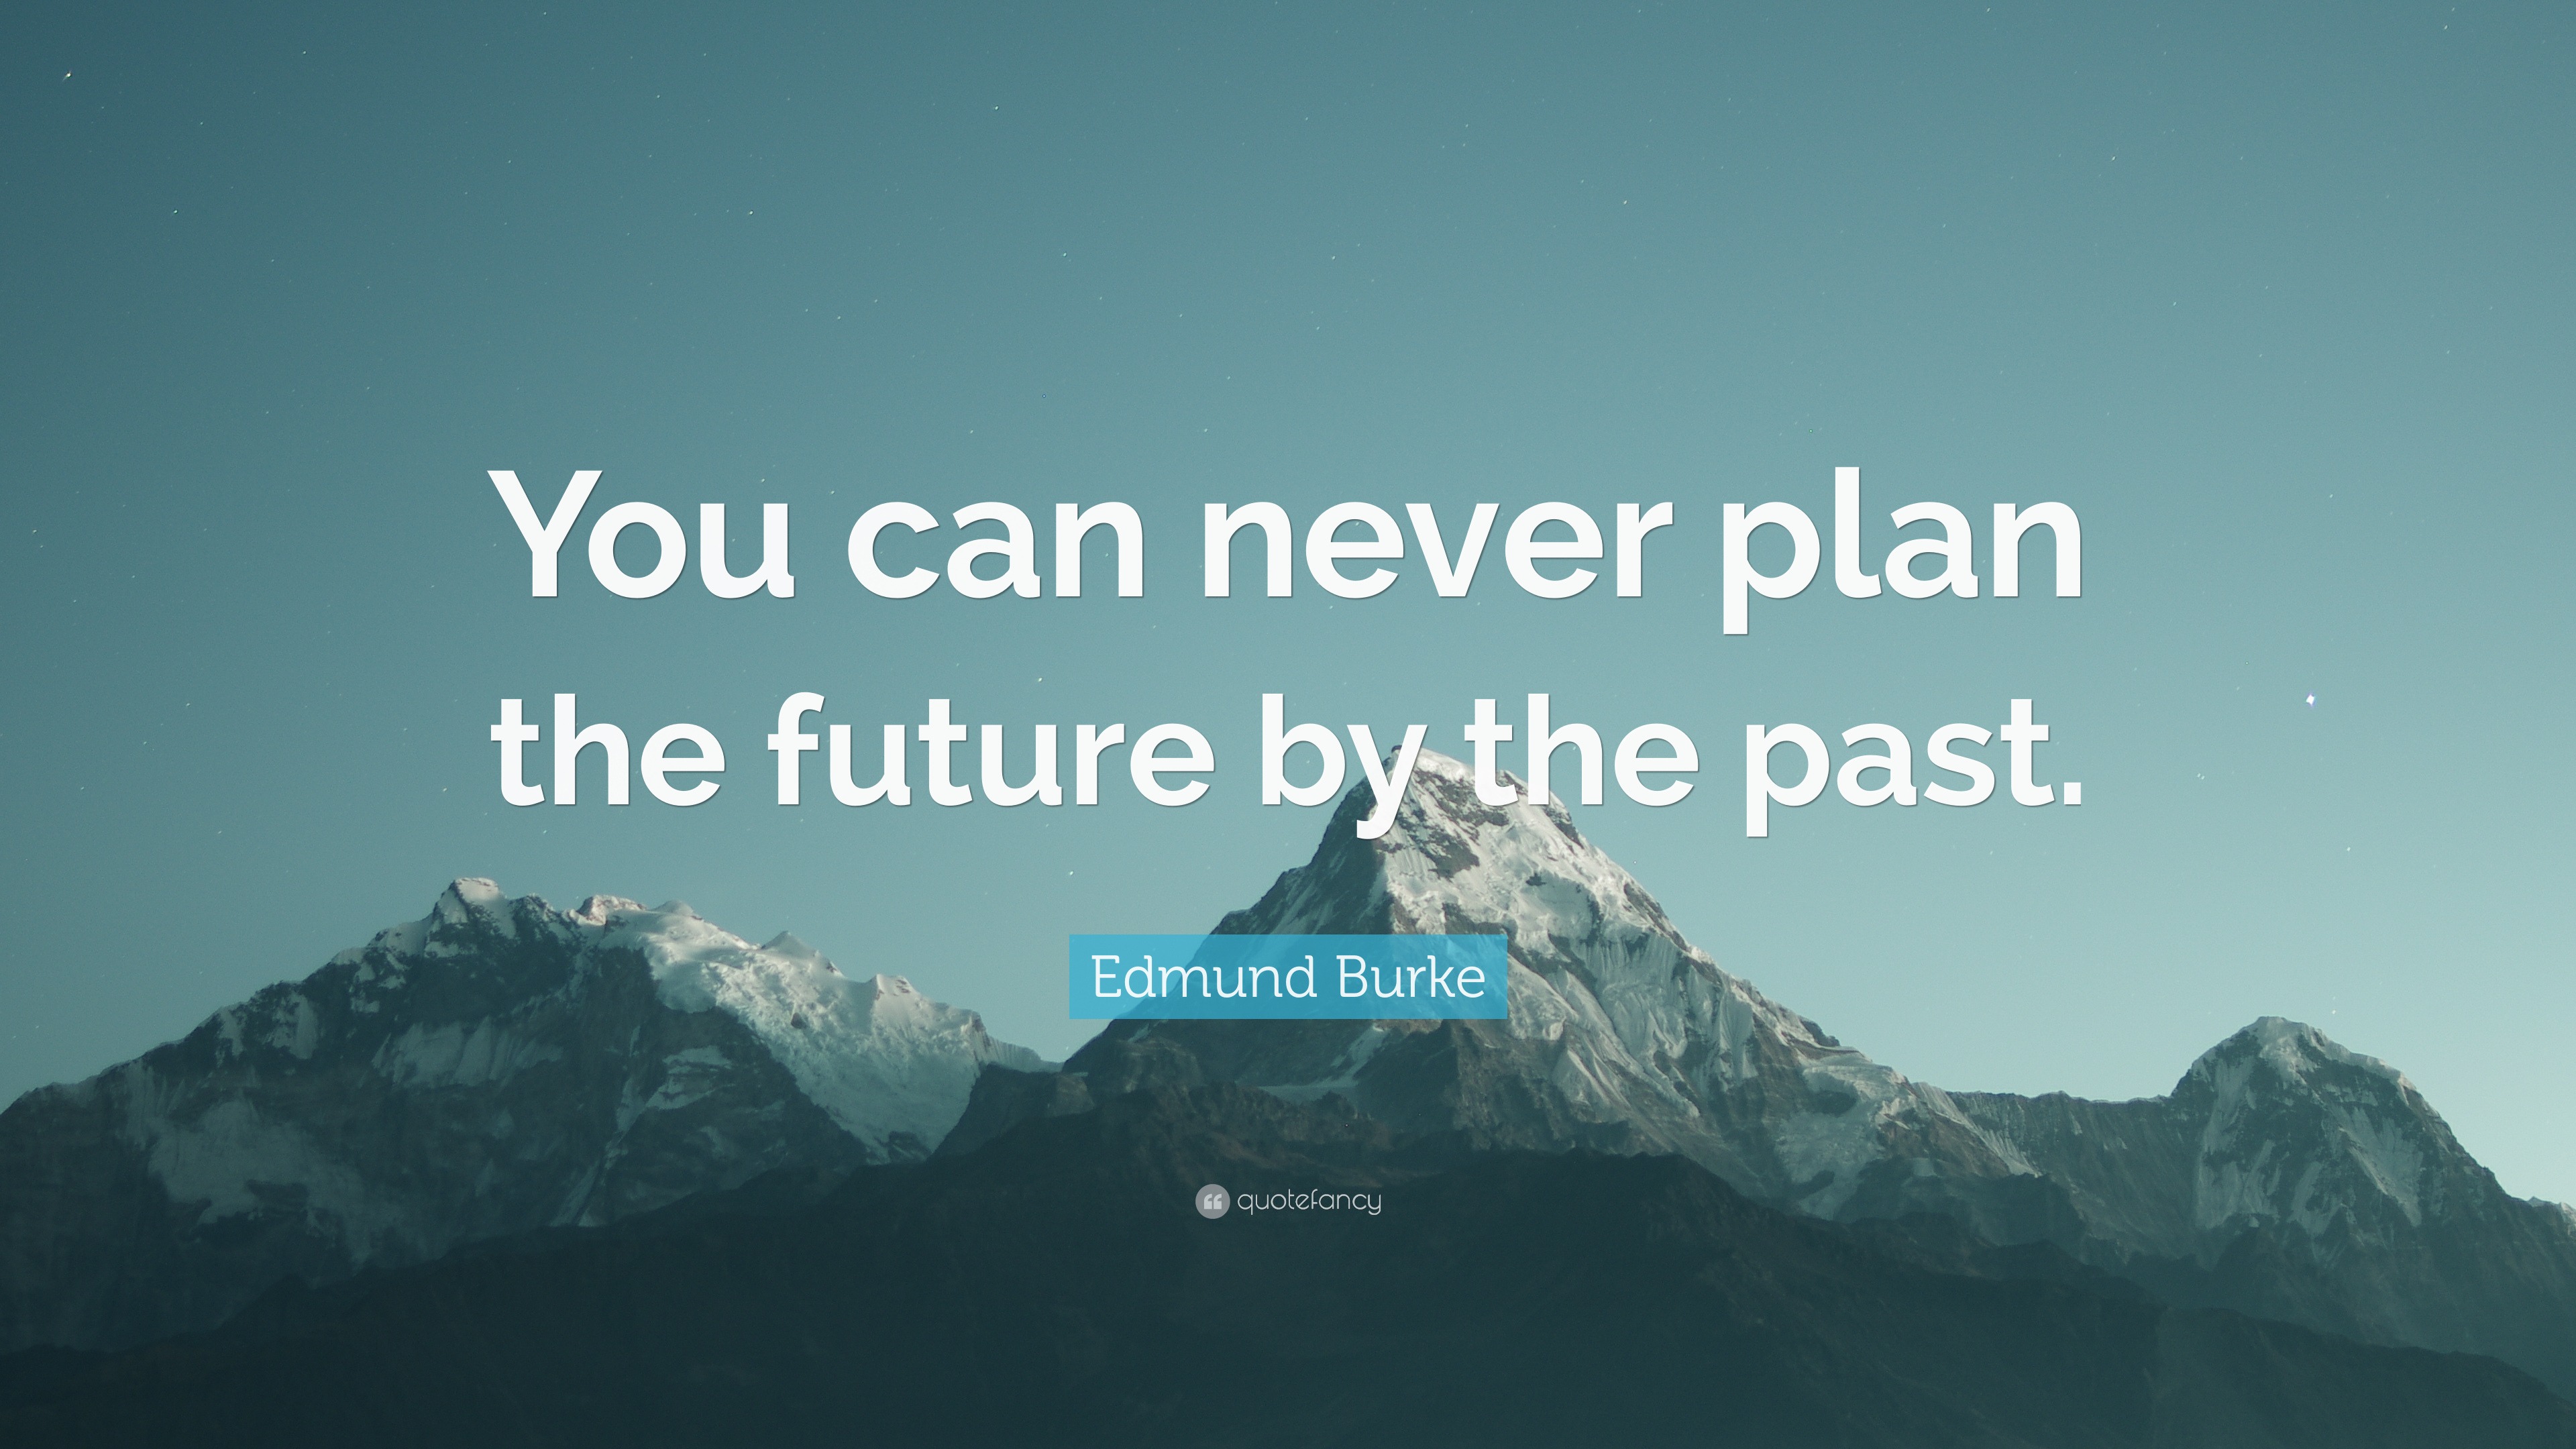 Edmund Burke Quote You Can Never Plan The Future By The Past 7 Wallpapers Quotefancy